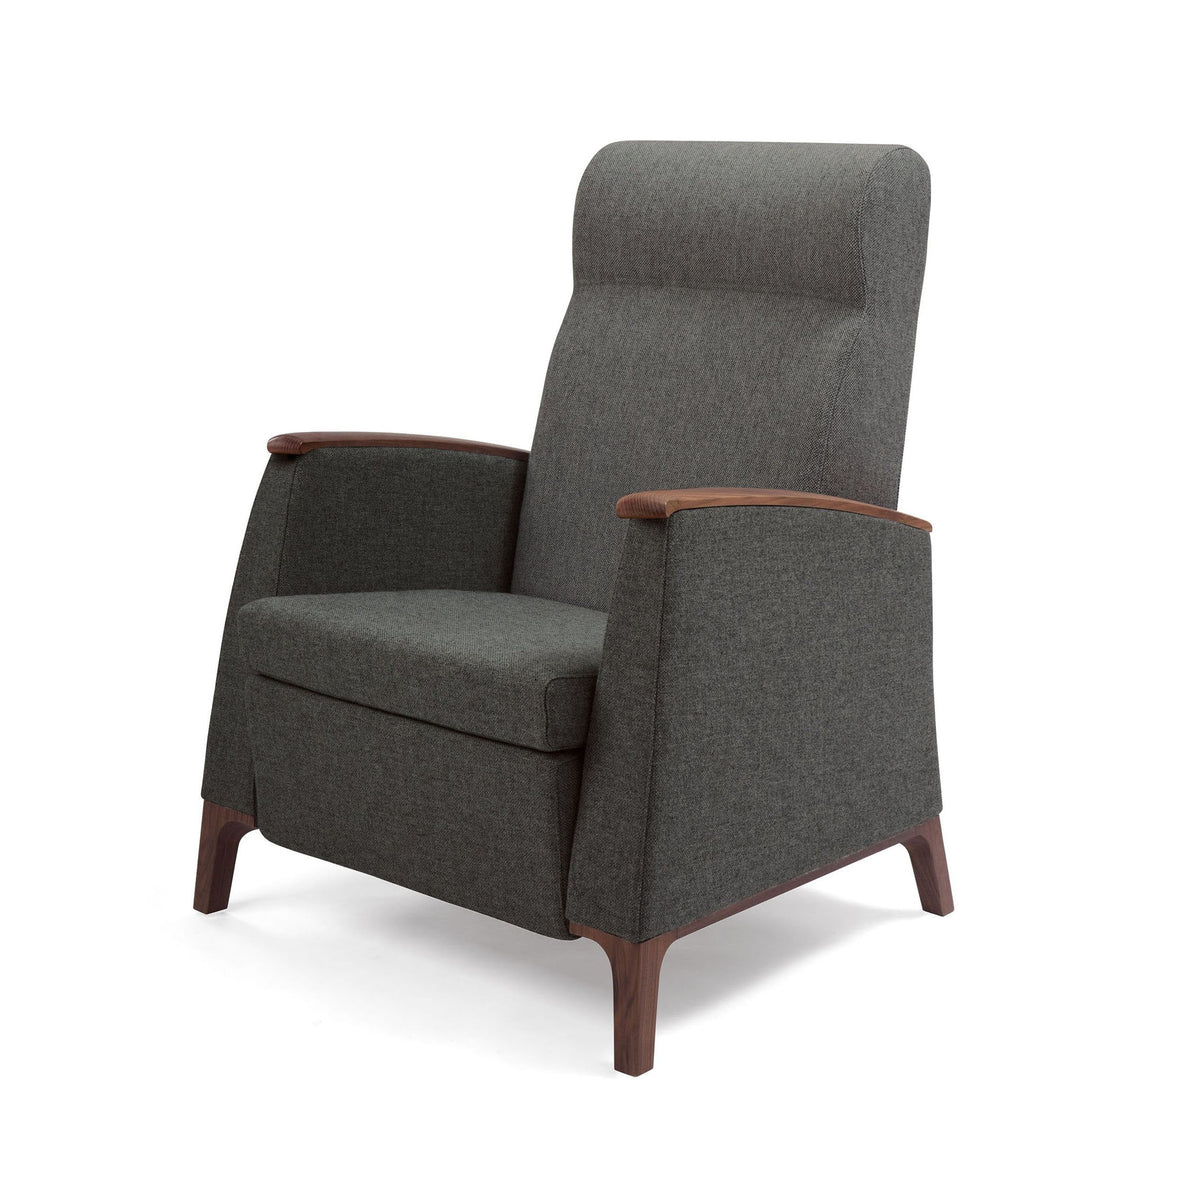 Mamy 57-64/2RP Lounge Chair-Piaval-Contract Furniture Store